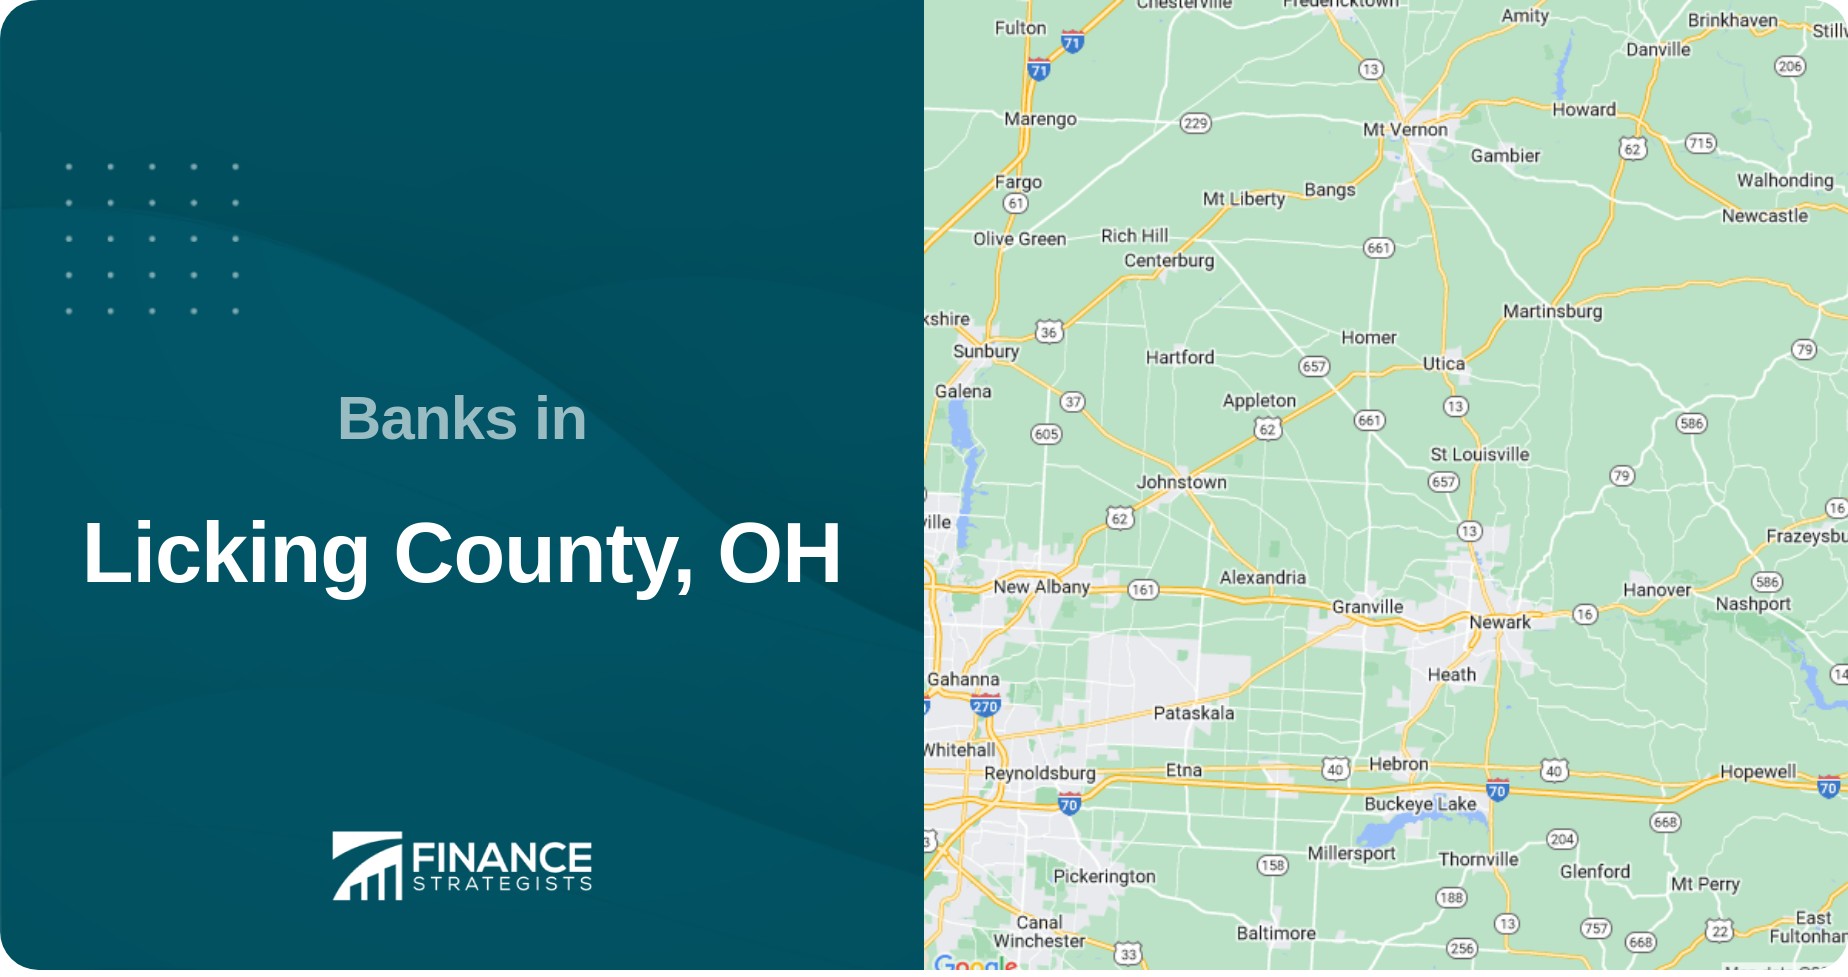 Banks in Licking County, OH